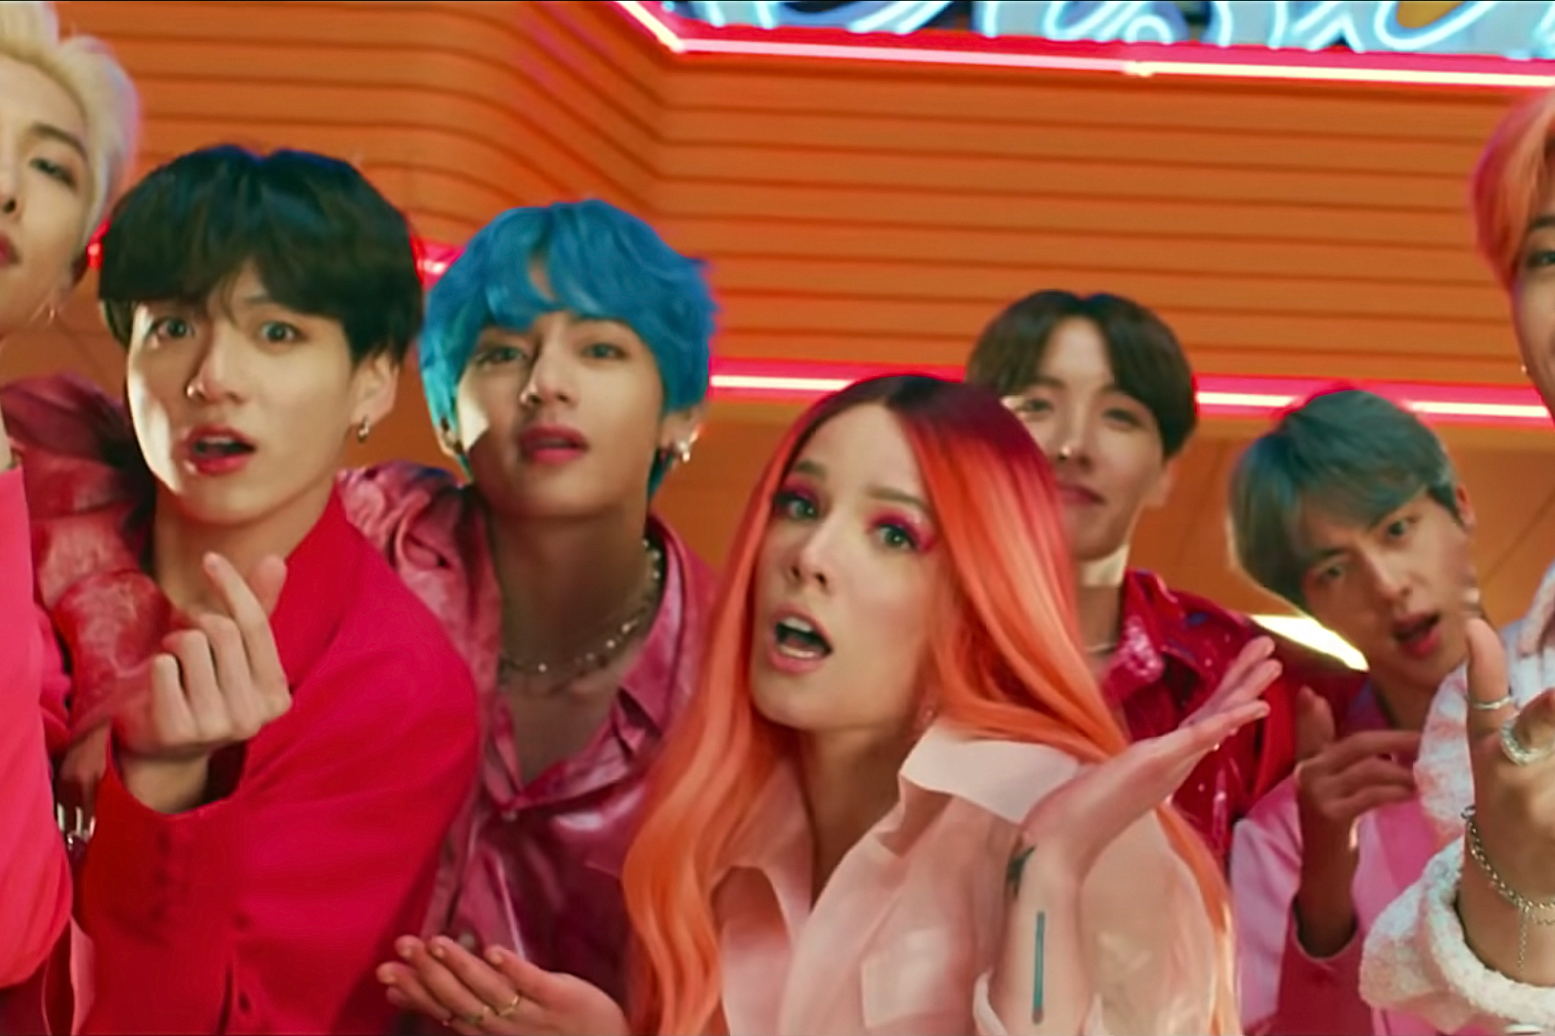 VIDEOCLIP NOU: BTS feat. Halsey – Boy With Luv